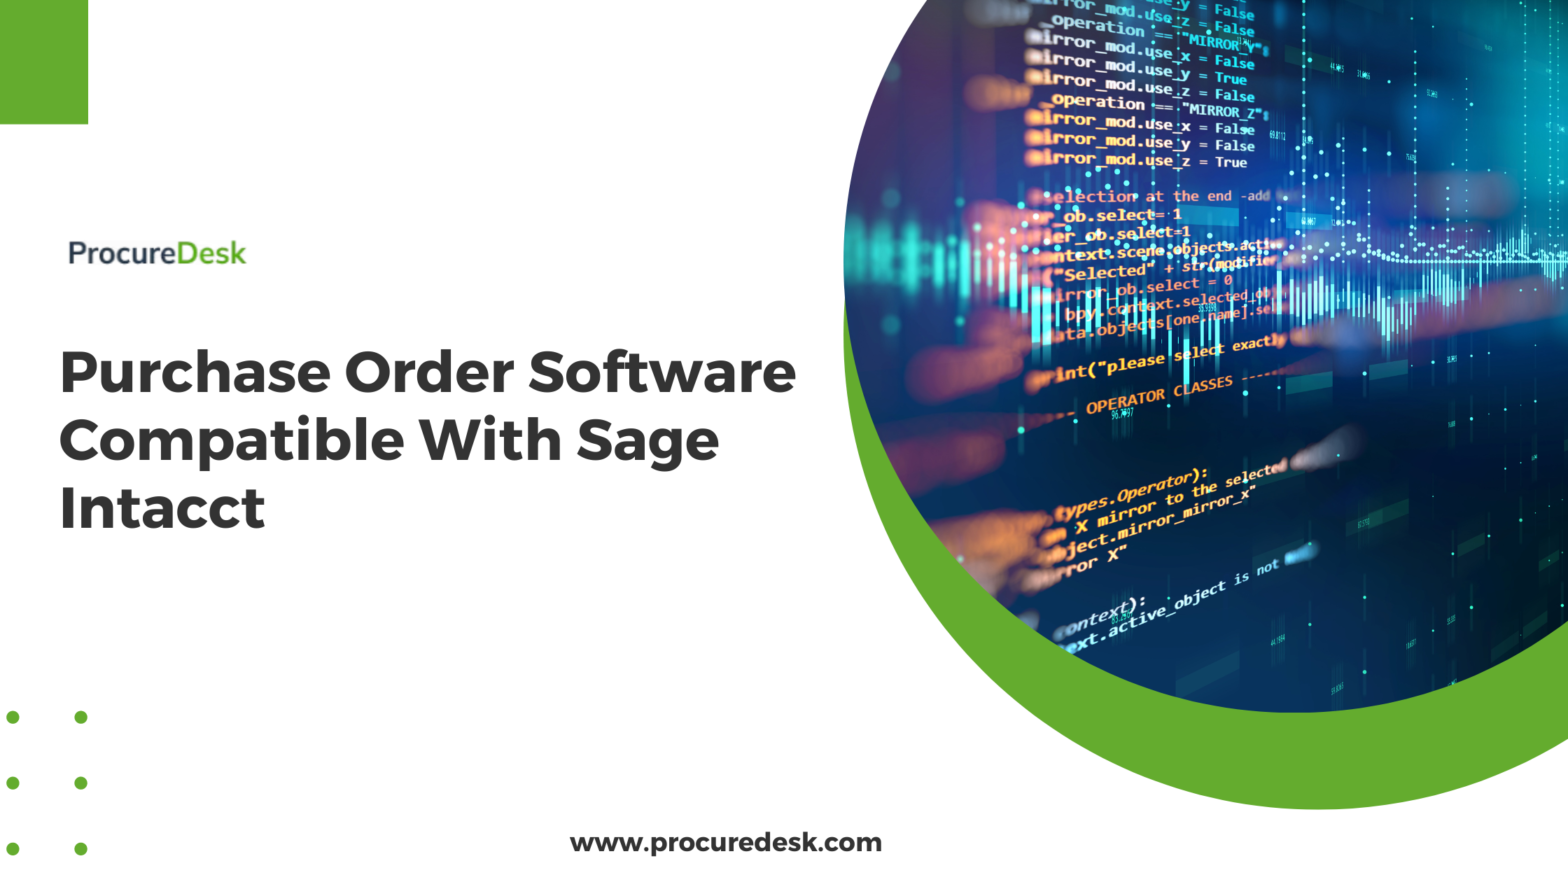 purchase order software compatible with sage Intacct